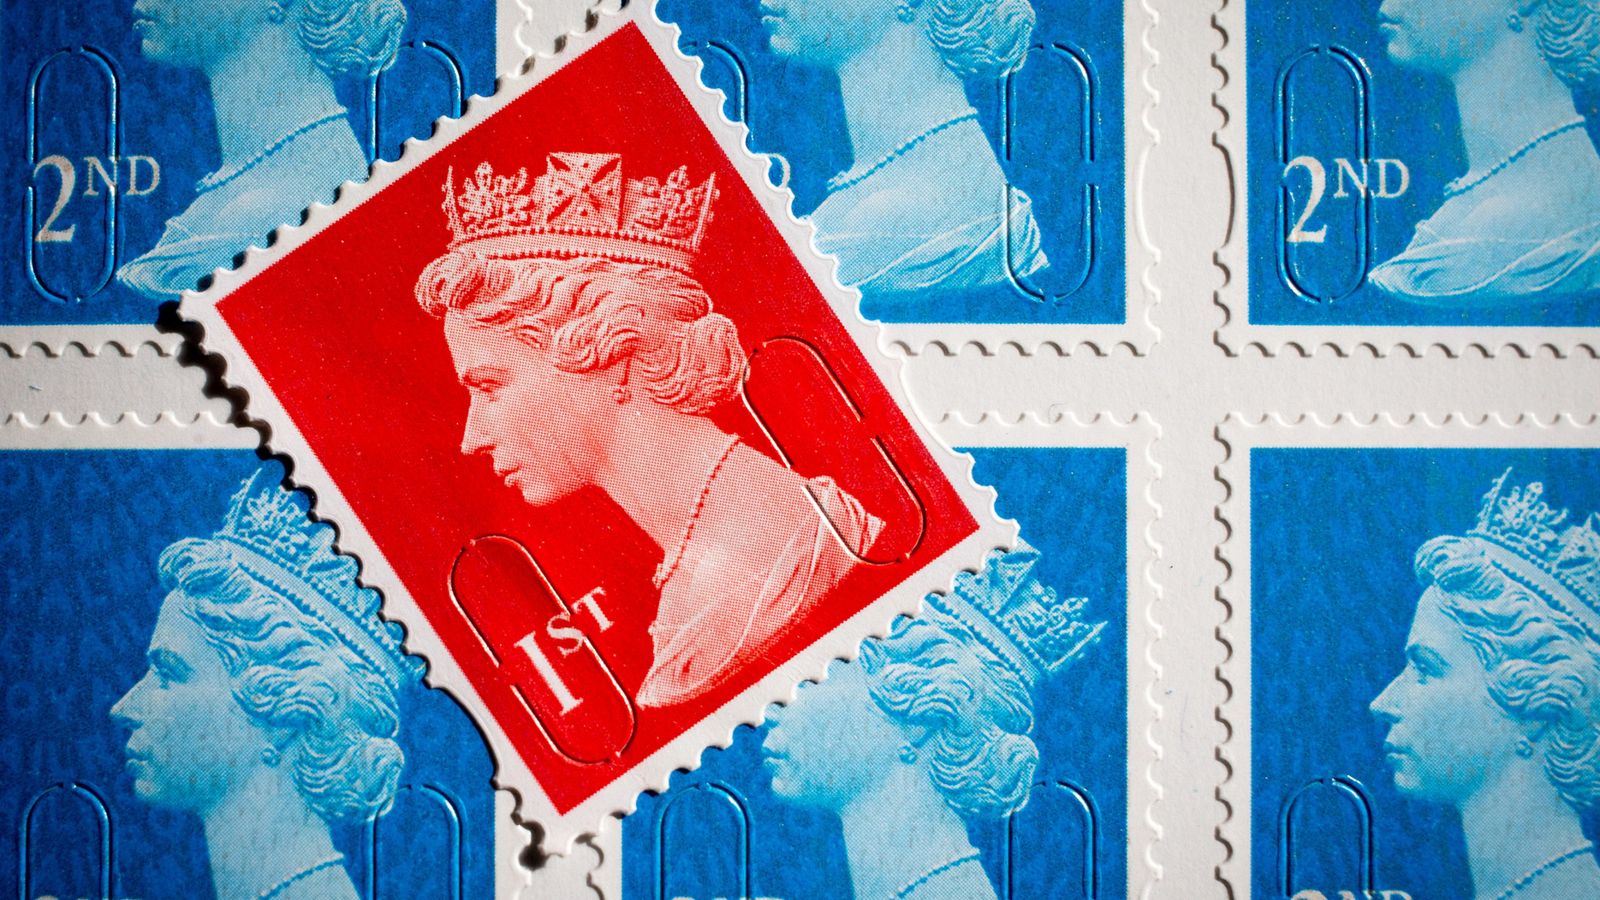 royal-mail-increases-price-of-stamps-to-maintain-quality-of-service-uk-news-sky-news